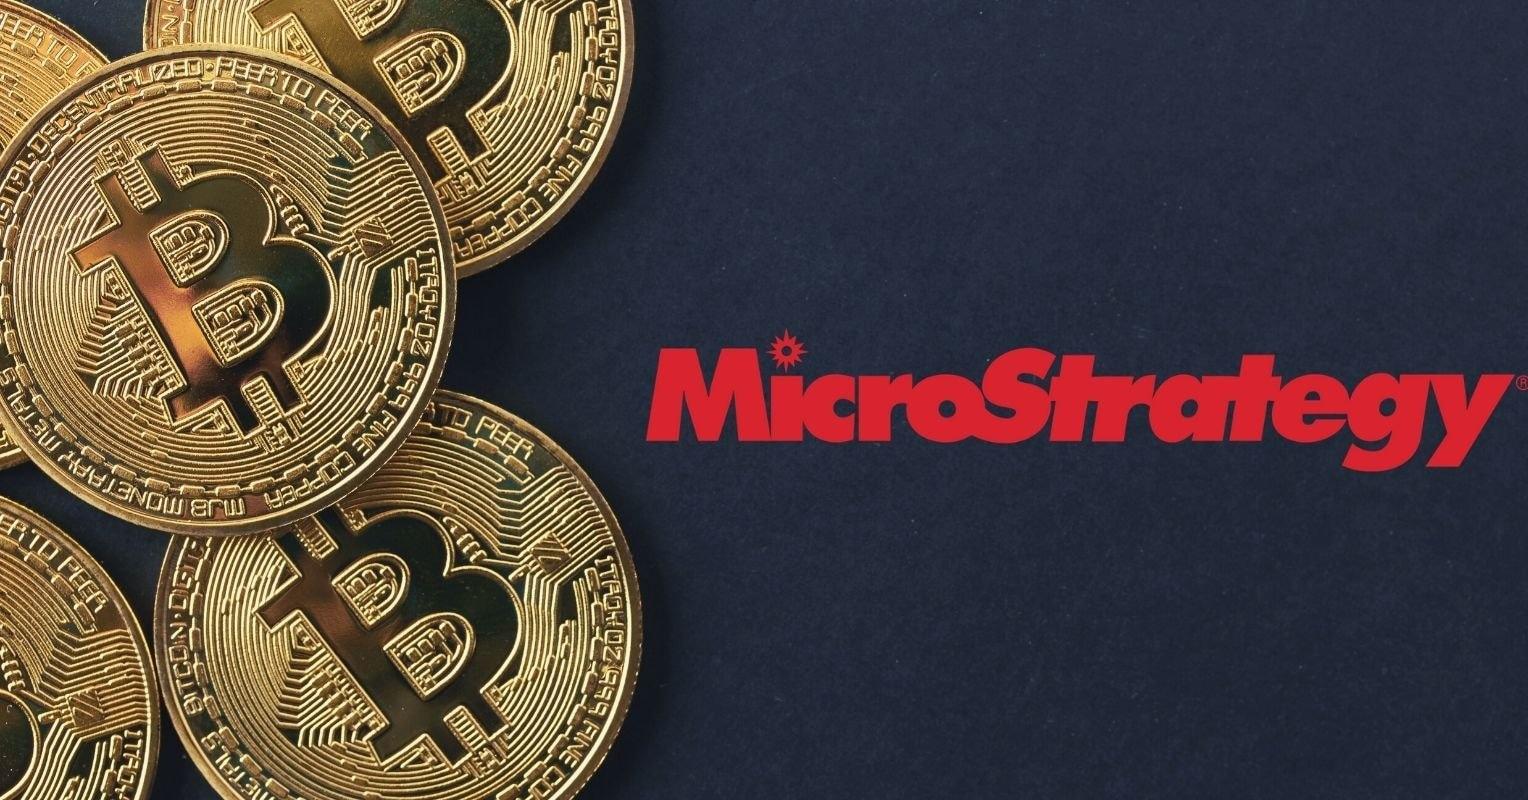 In July, MicroStrategy acquired an additional 467 BTC for $14.4 million and now holds 152,800 BTC